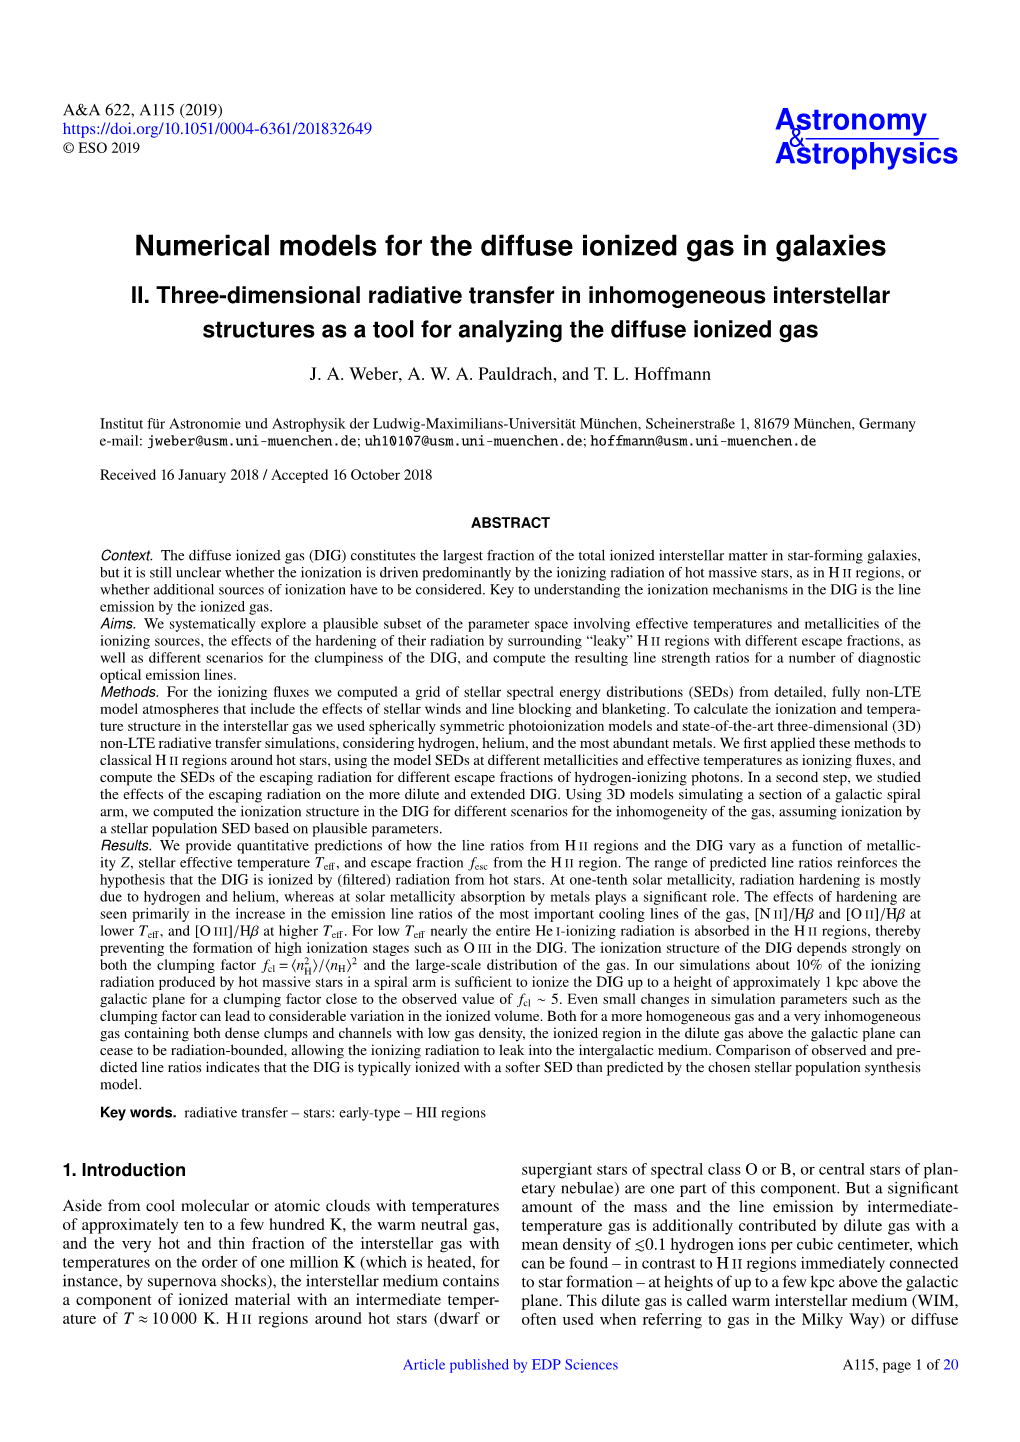 Numerical Models for the Diffuse Ionized Gas in Galaxies